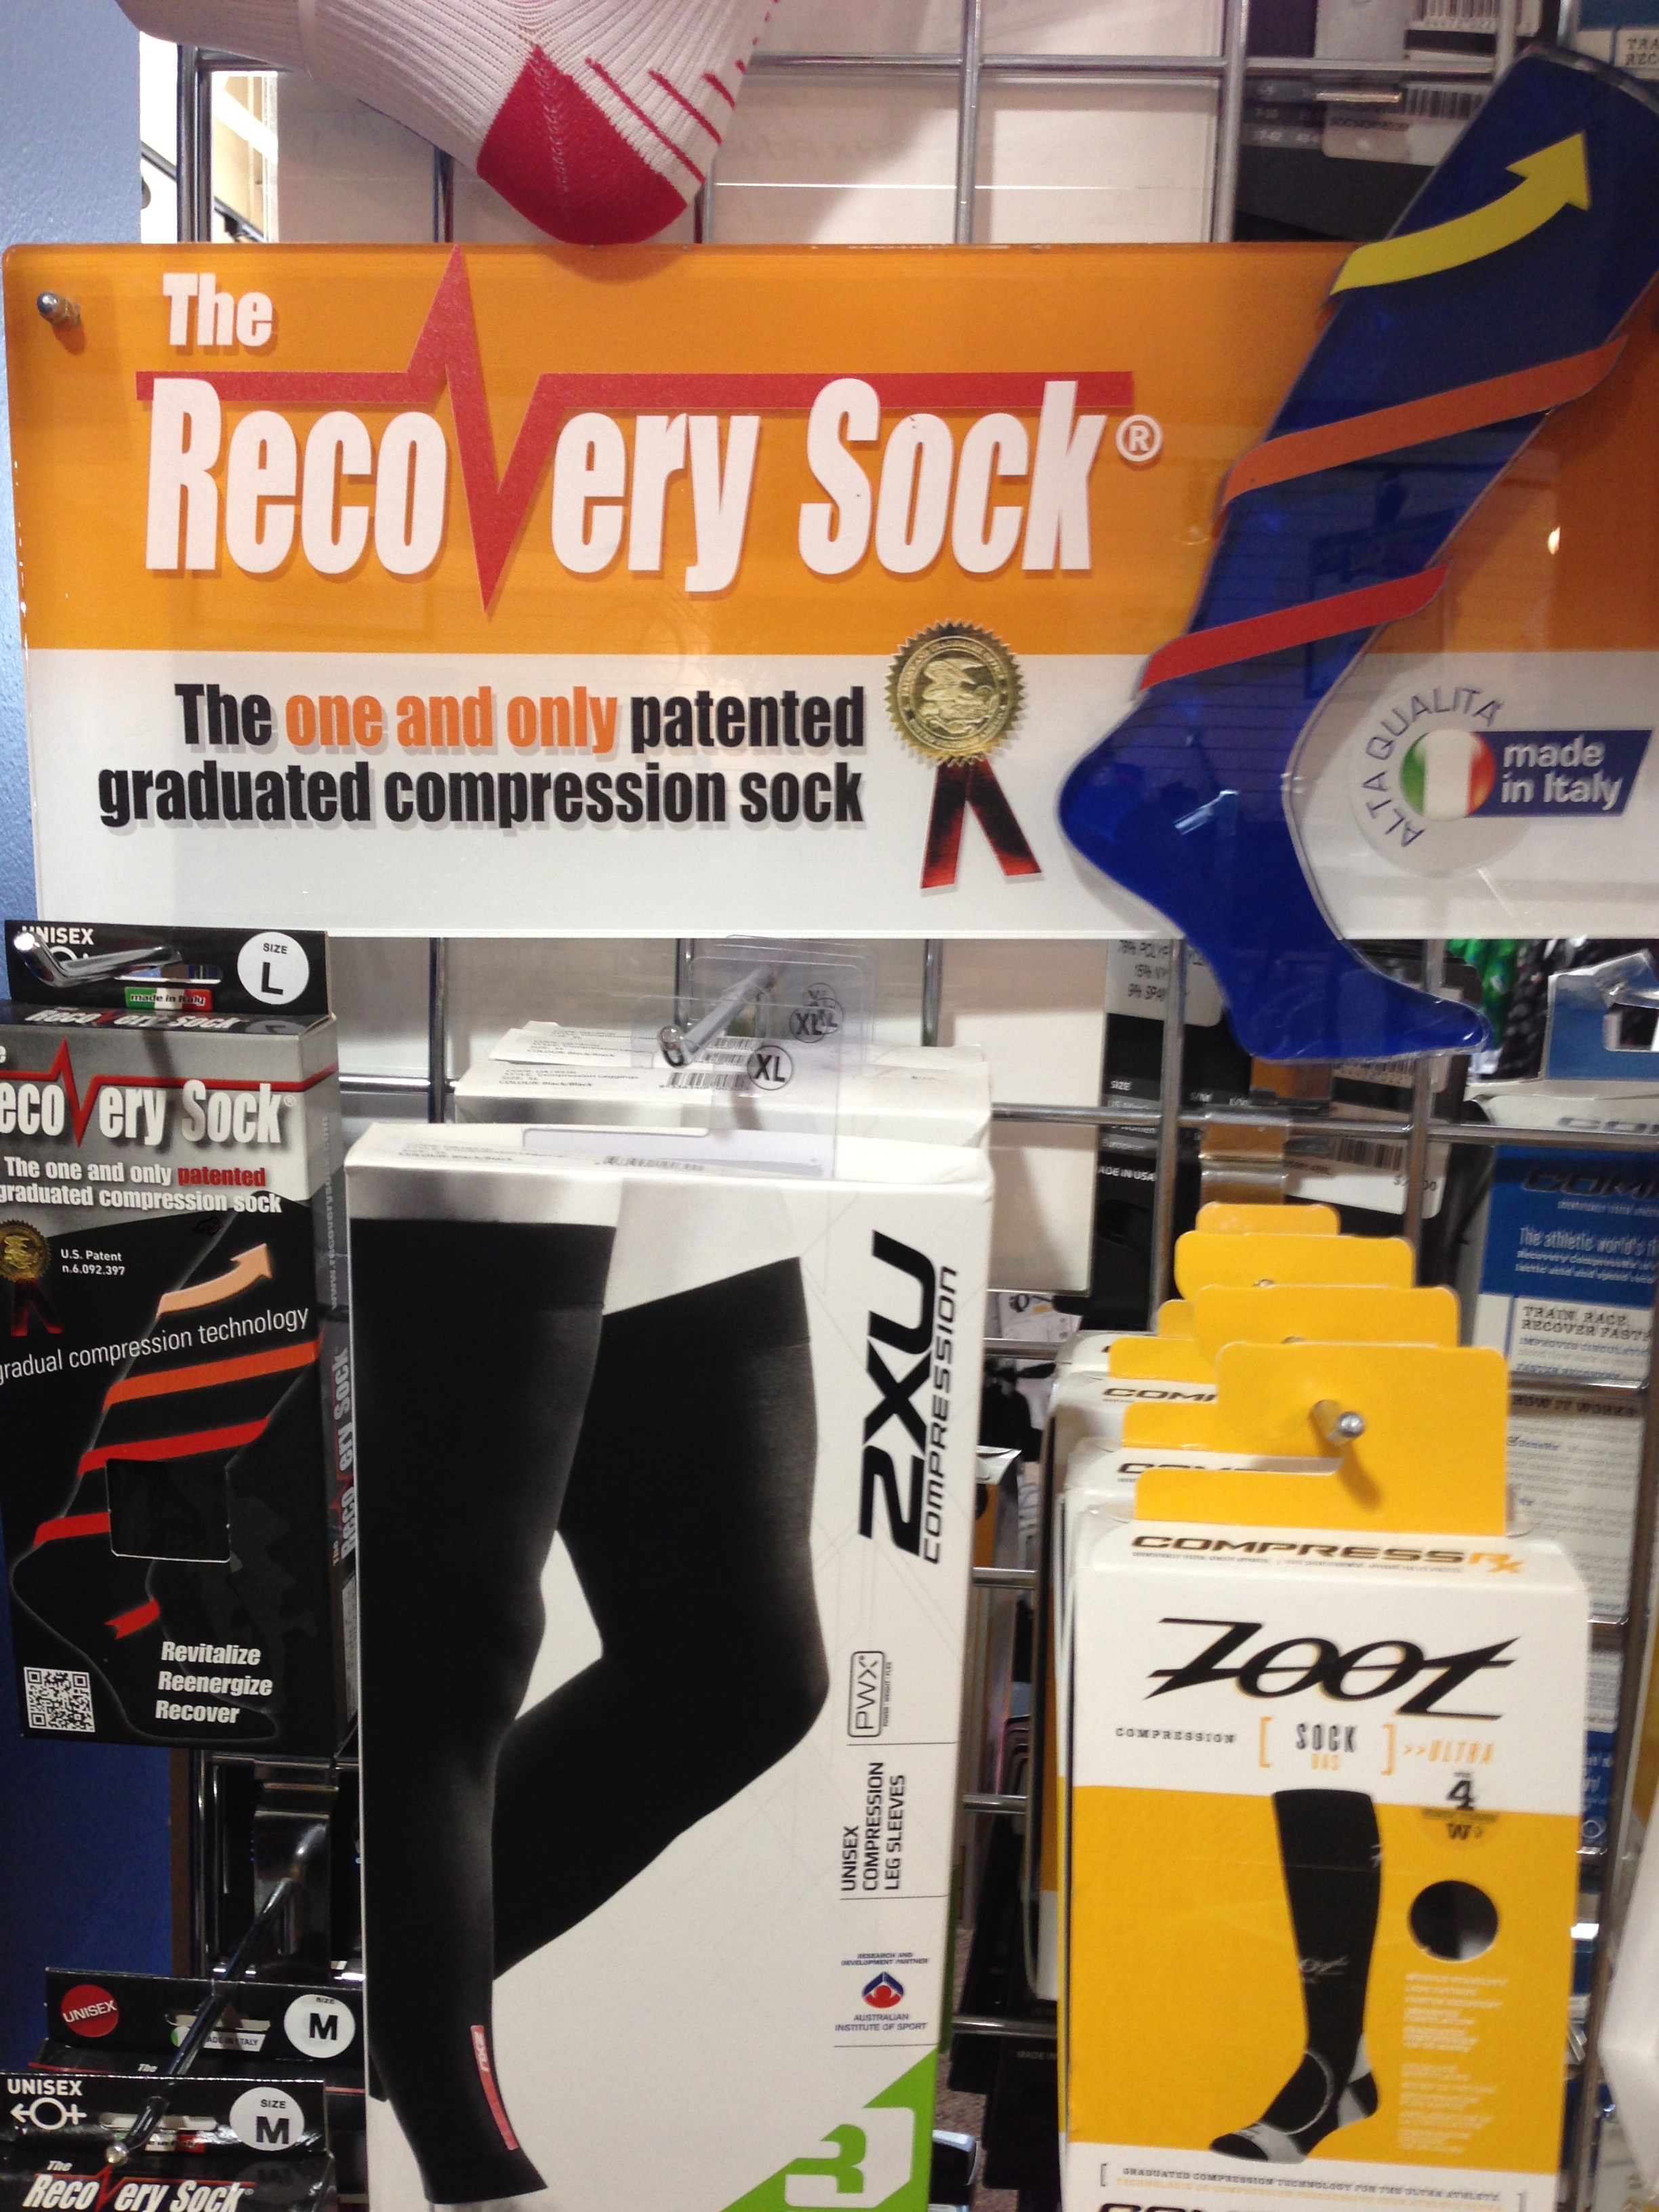 There are lots of choices nowadays for these compression stuff.